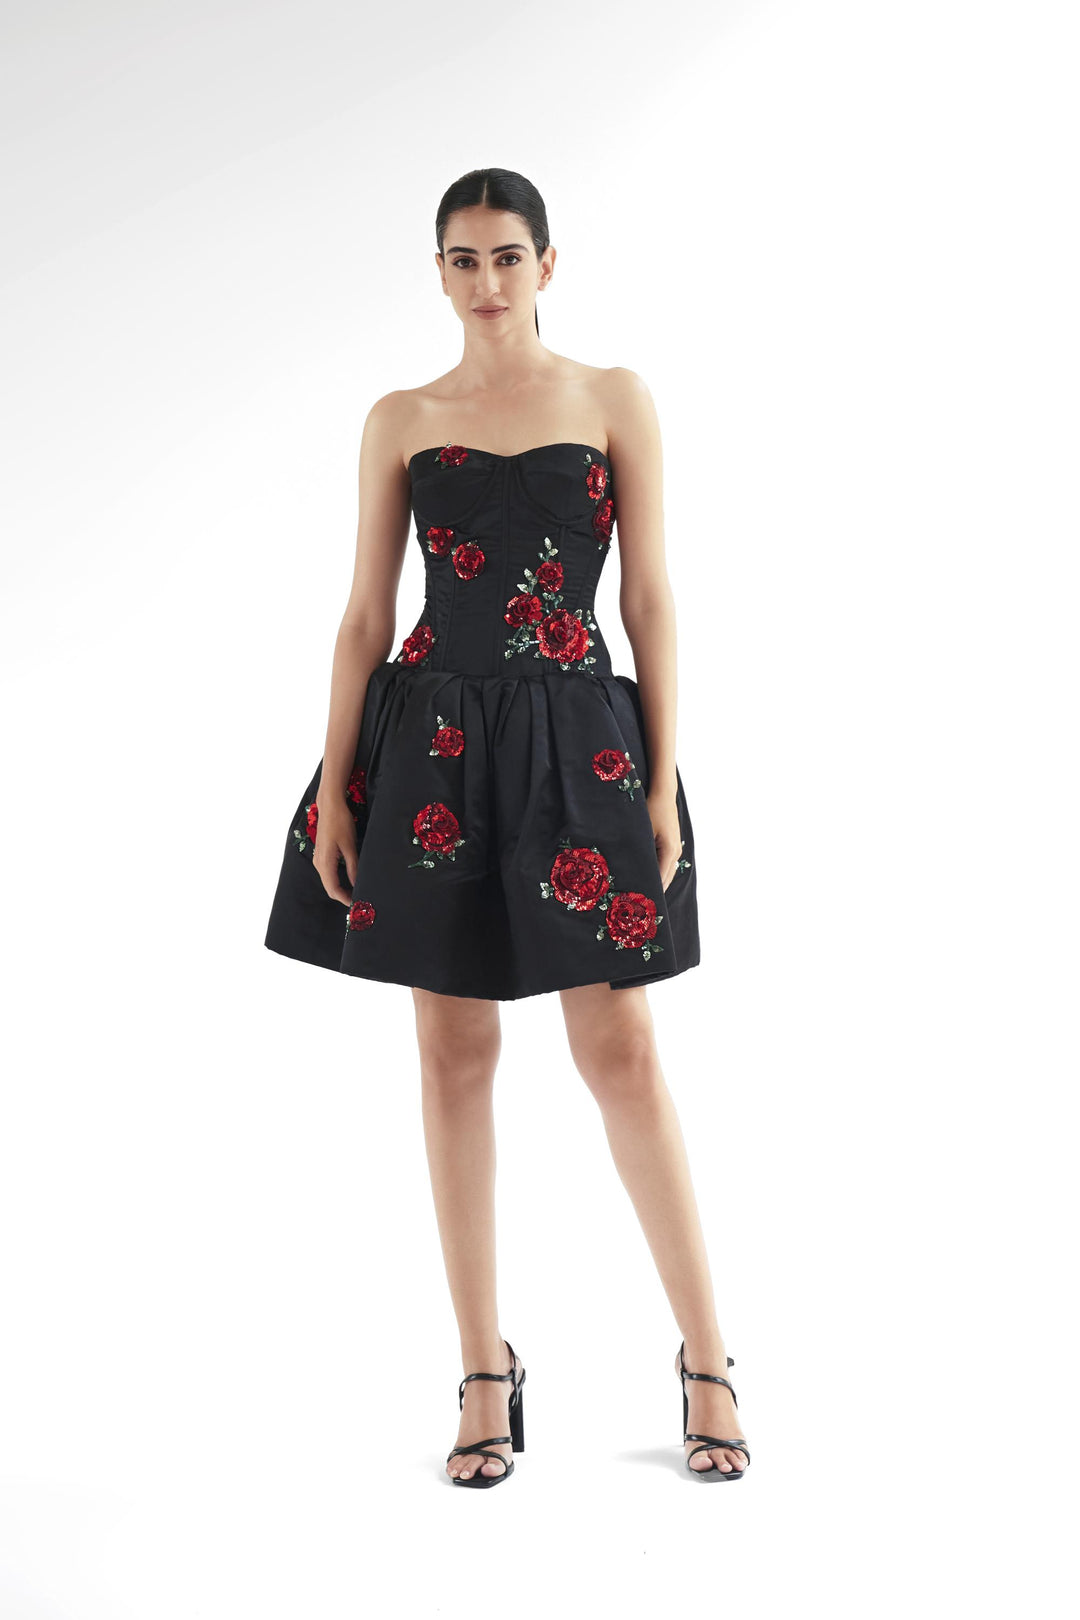 Corseted drop waist dress with puff Hem and rose embroidery